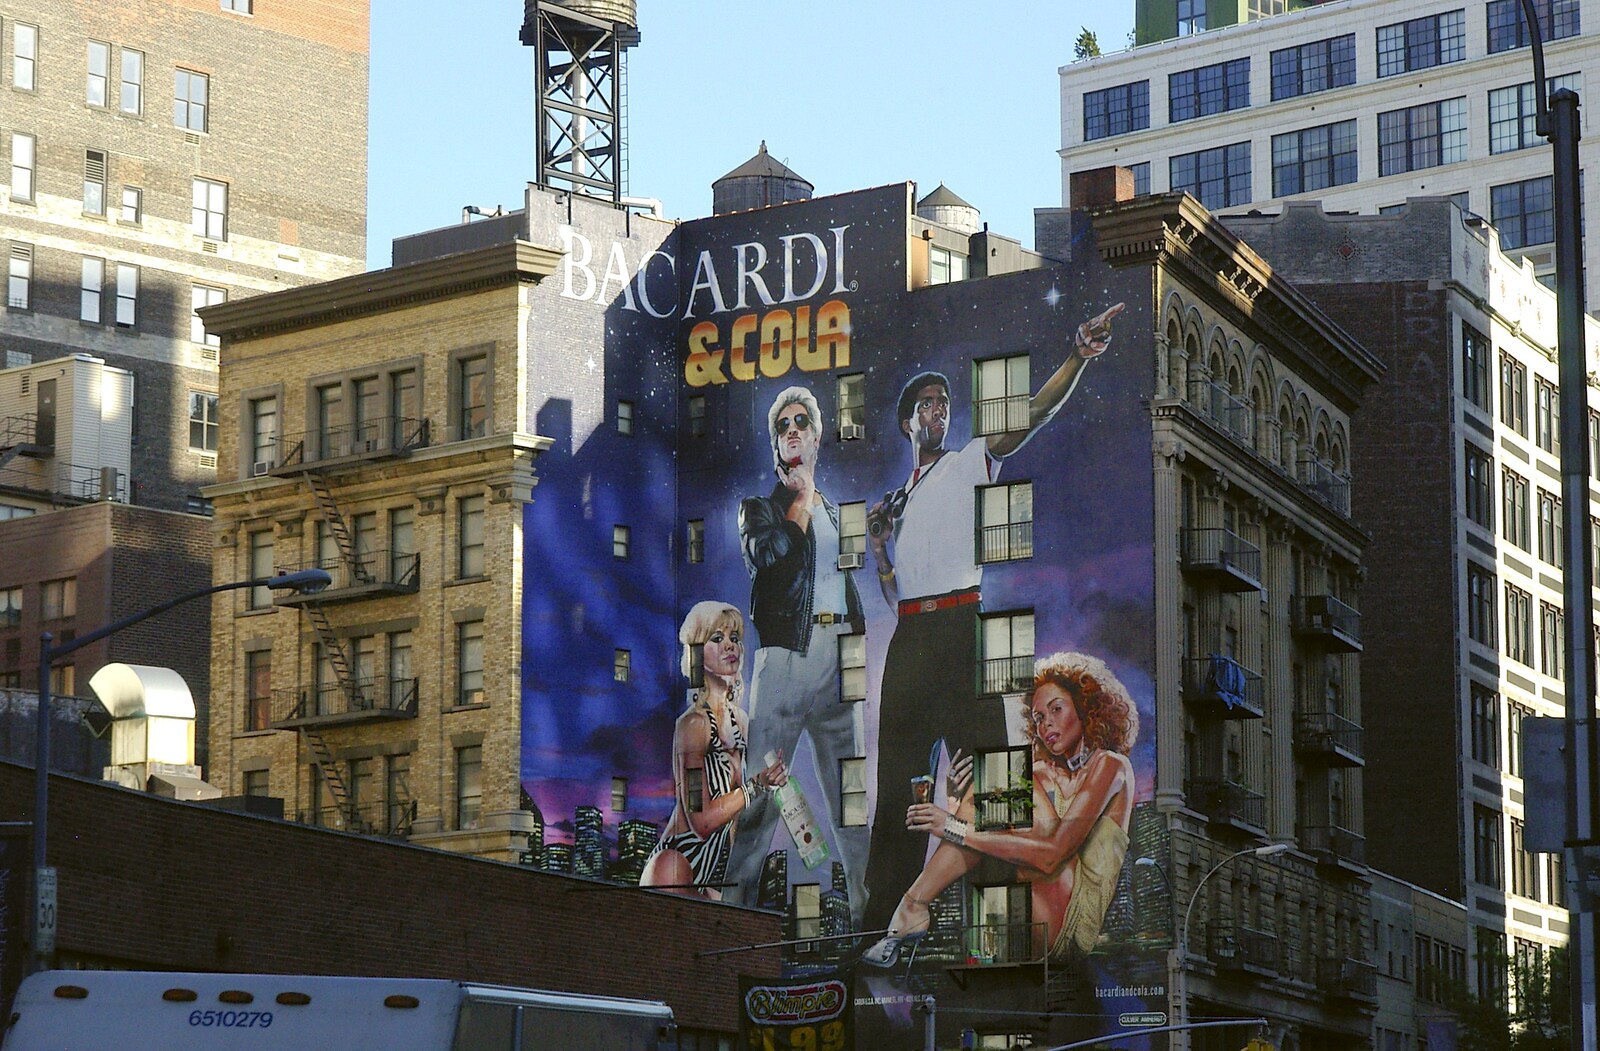 A big building-side Bacardi advert from A Union Square Demo, Bryant Park and Columbus Circle, New York, US - 2nd May 2006